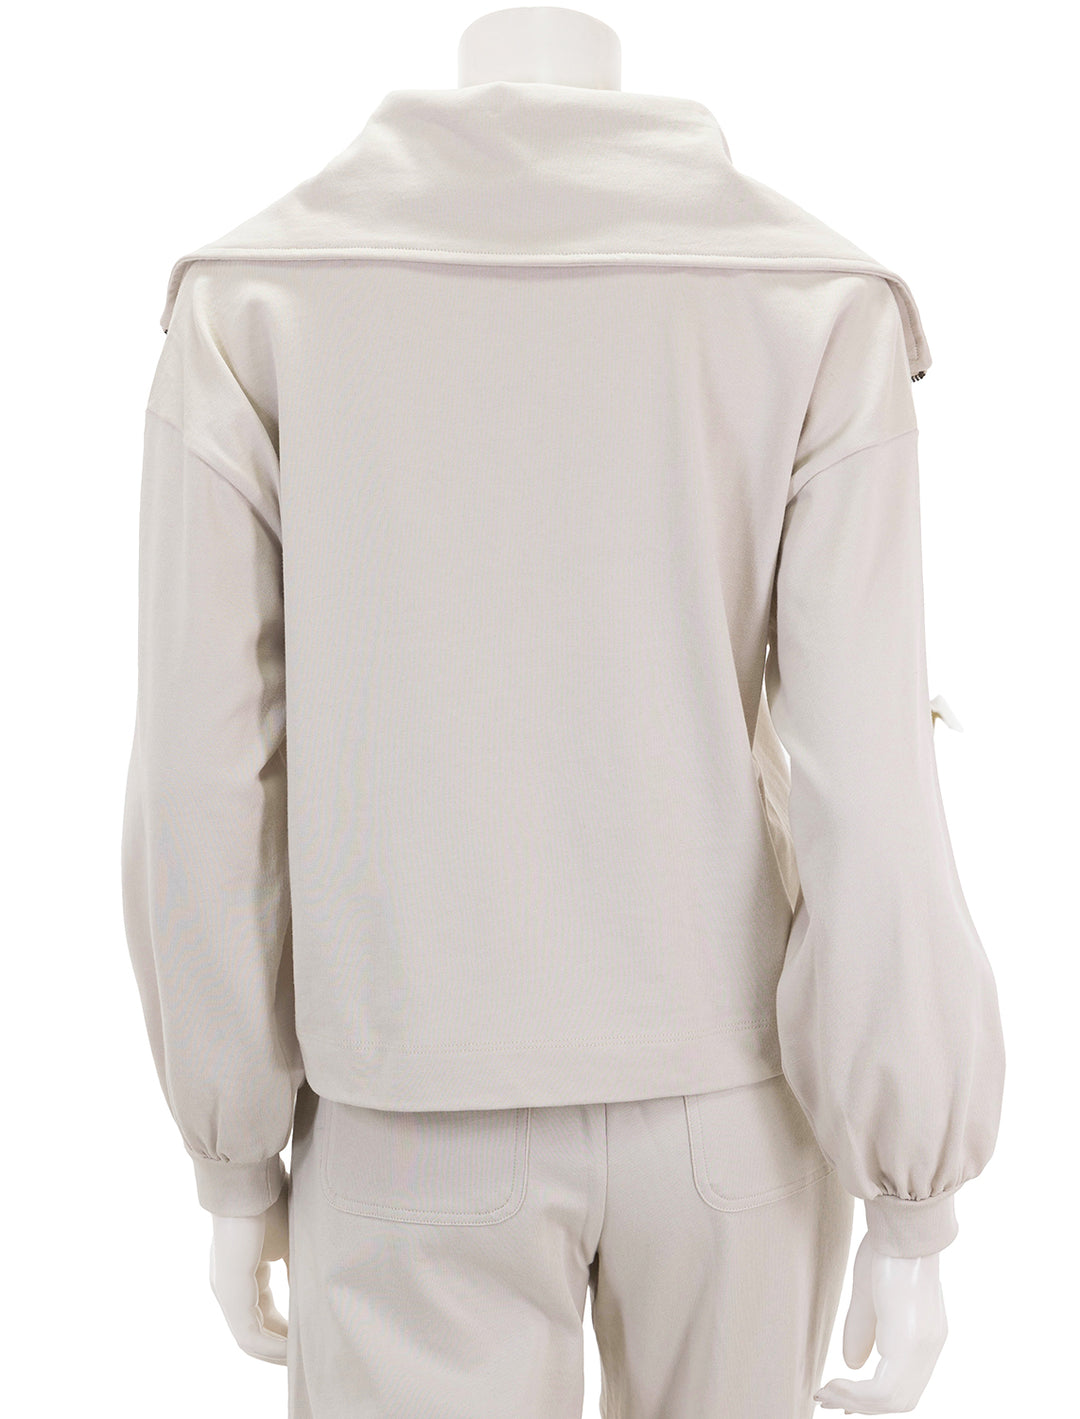 Back view of Lilla P.'s full sleeve half zip pullover in alabaster.